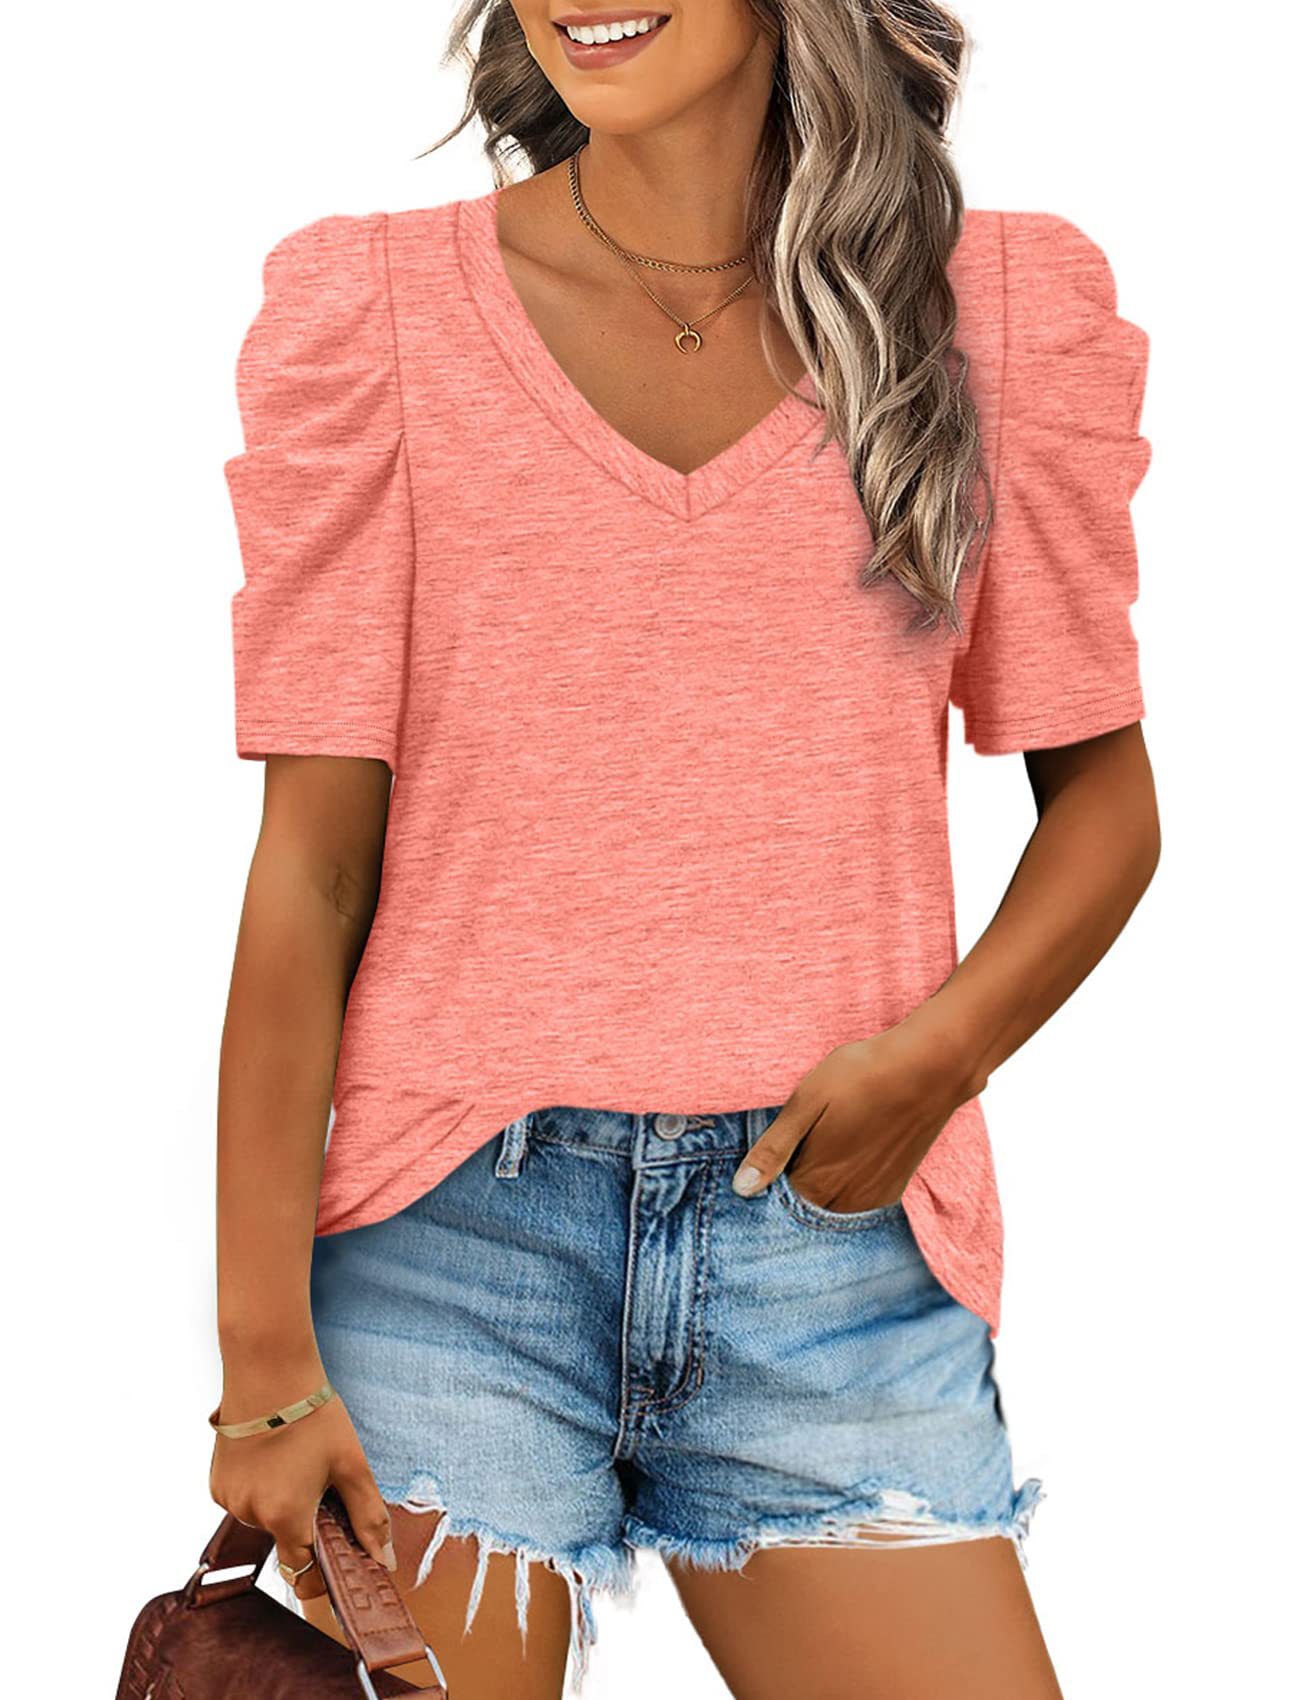 Women's Summer Shirts V-Neck Casual T-Shirts Puff Sleeve Top Women's Solid Color S-2XL